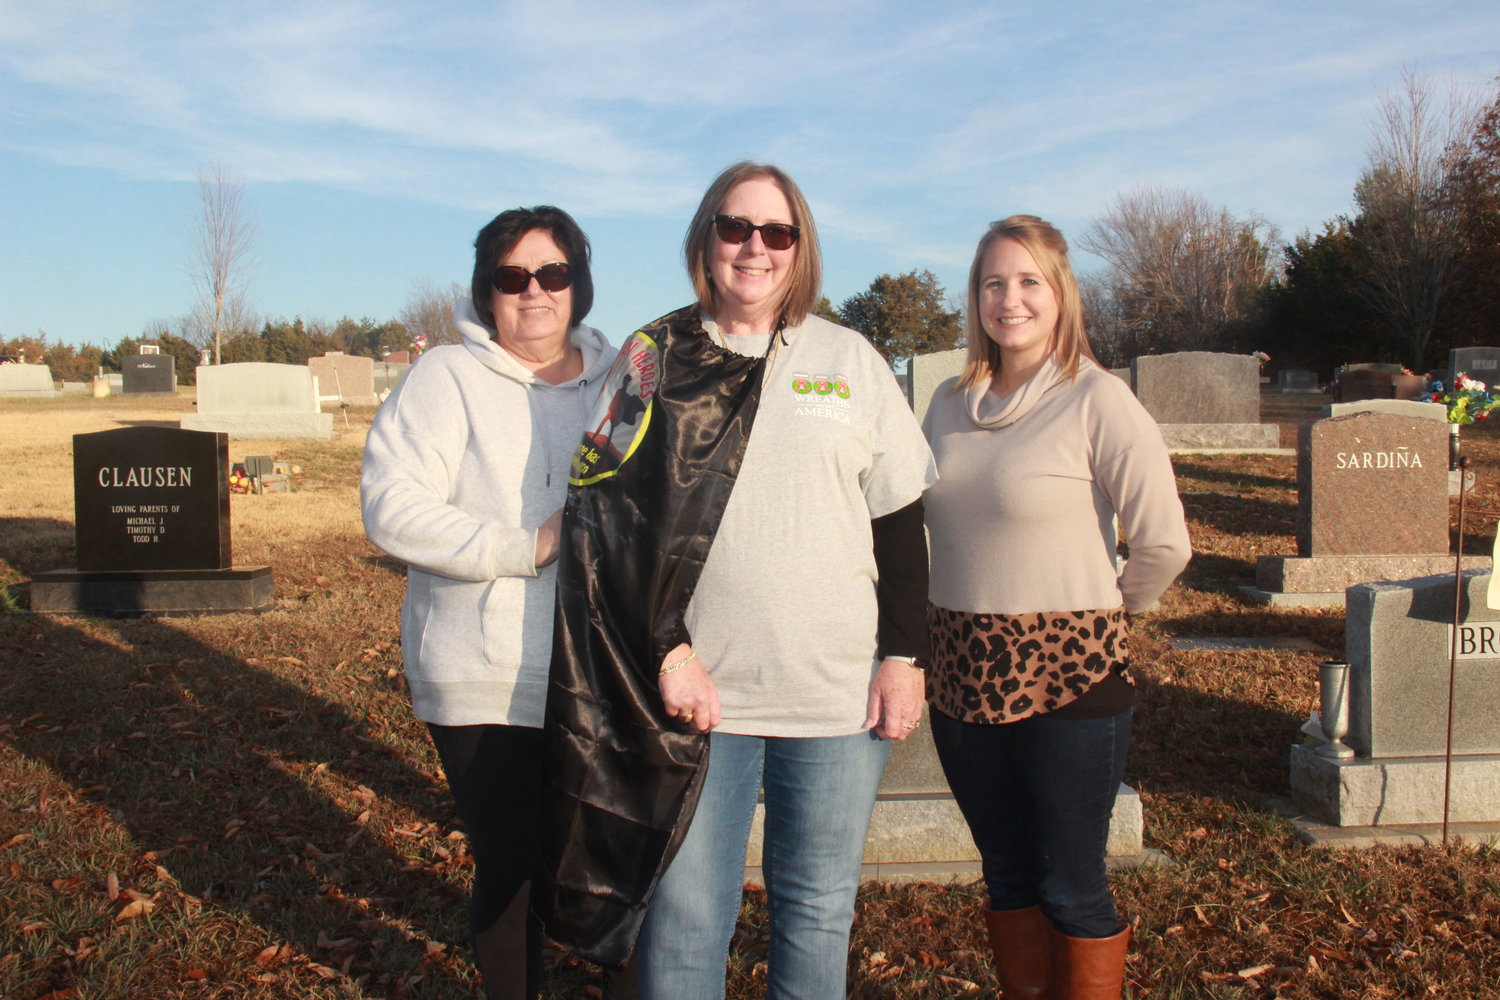 HIDDEN HERO — Andrea Romaker, center, works throughout the year to organize fundraisers and volunteer groups so that more than 550 wreaths can be laid at the graves of veterans at Christmastime. She was presented with her very own superhero cape by Mandy Andrews of the Warren County Record, while doing prep work at the Holy Rosary Cemetery with fellow volunteer Donna Mitchell, left.